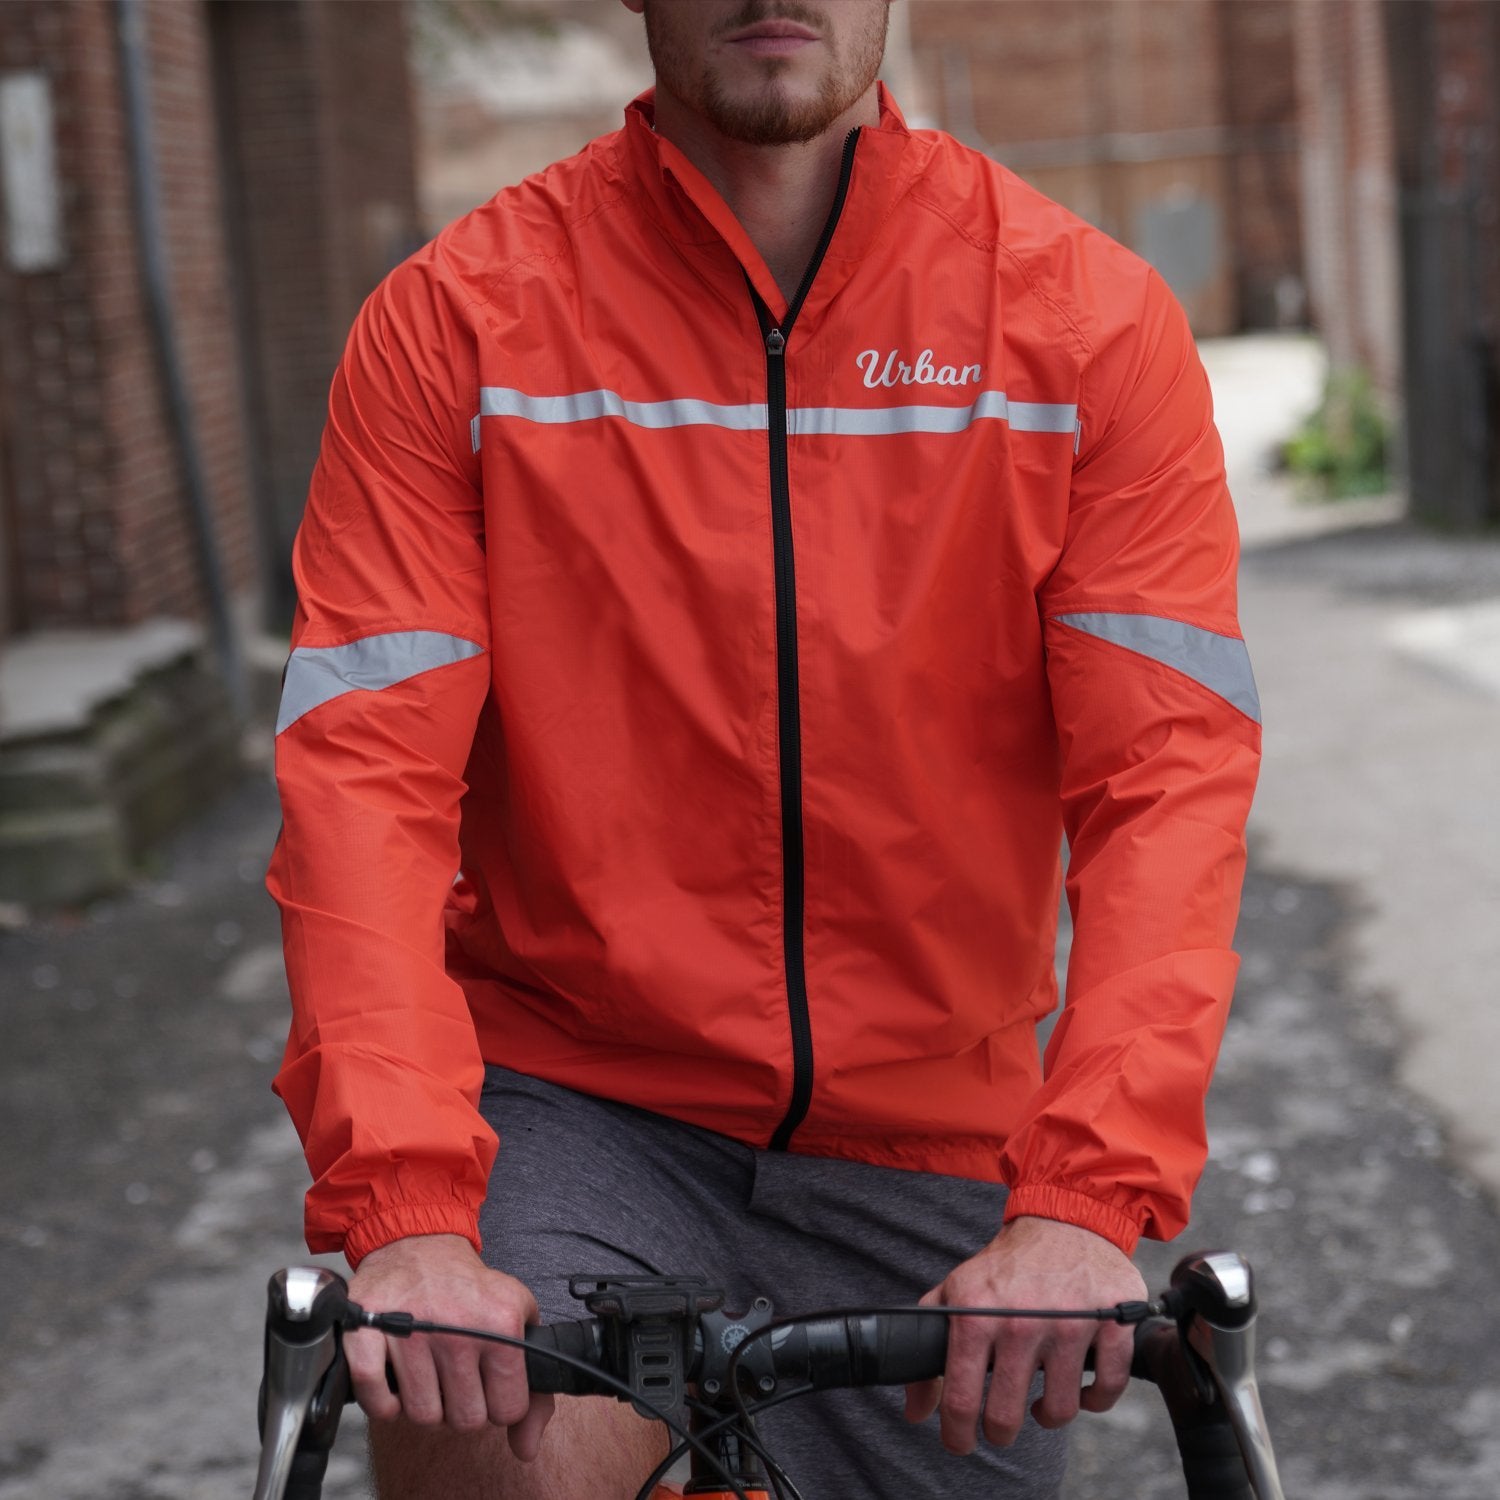 Buying a cycling jacket